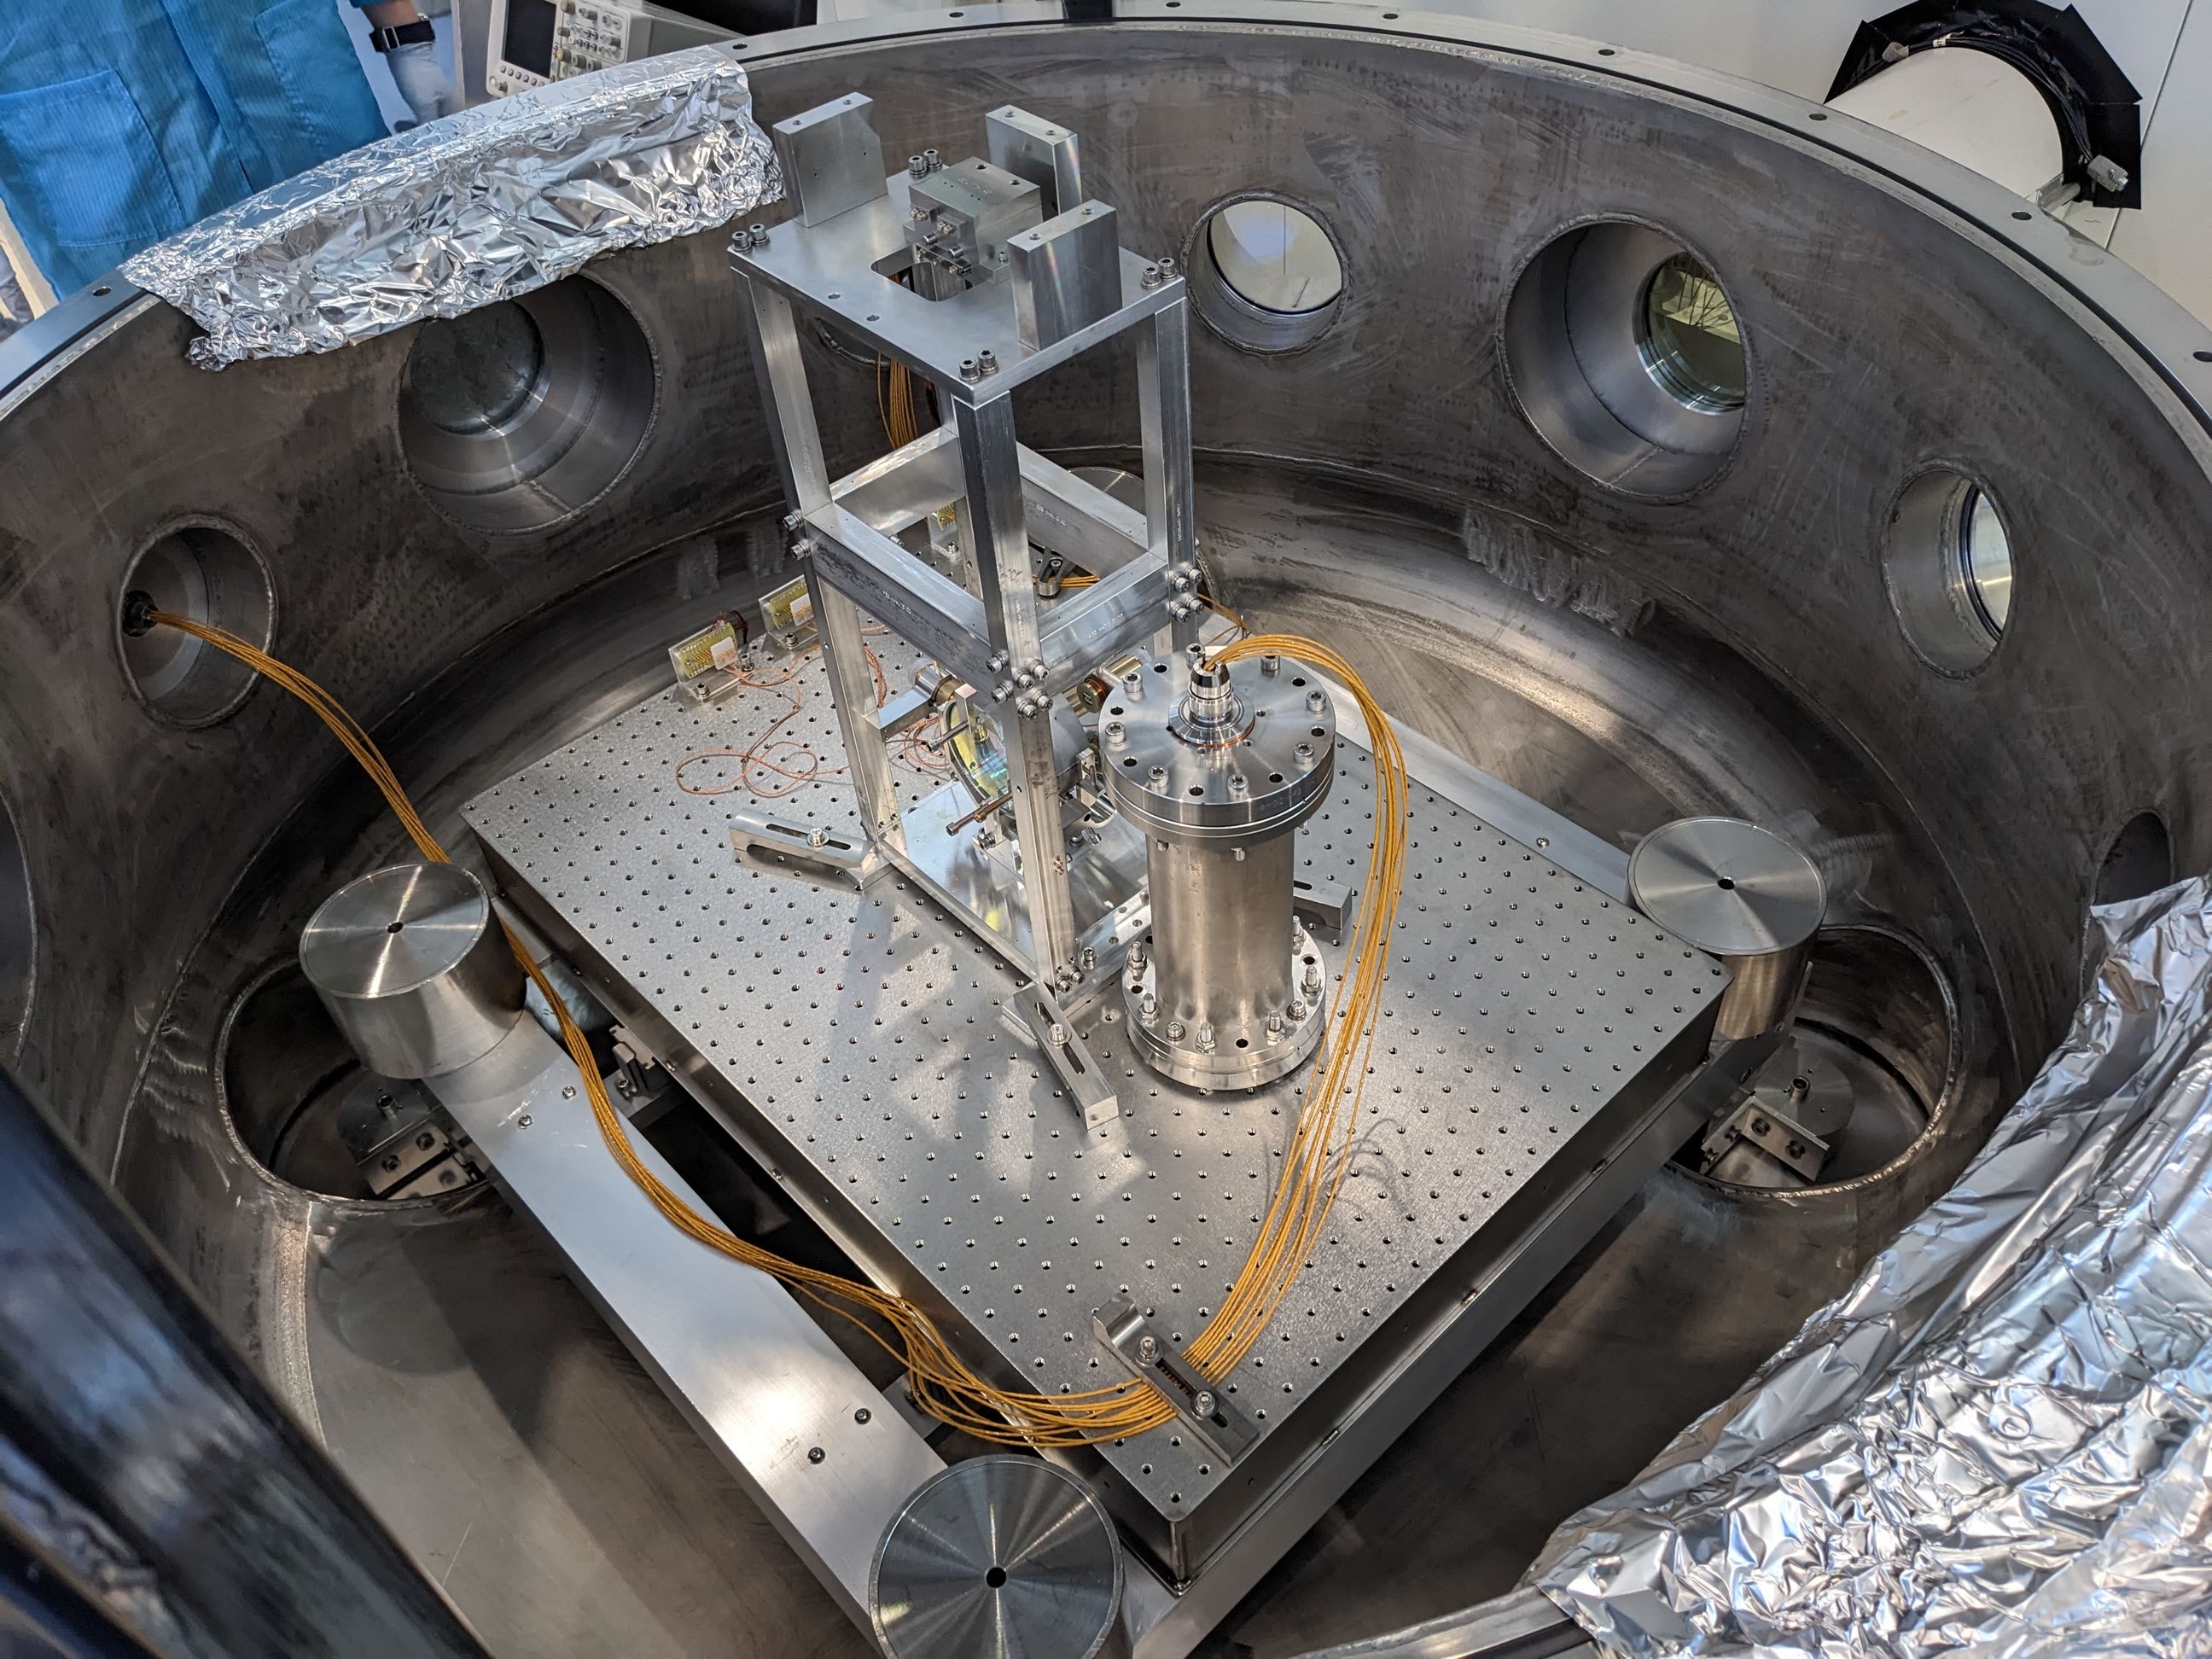 A test mass (mirror) suspended in a LIGO small optic suspension, next to a seismometer